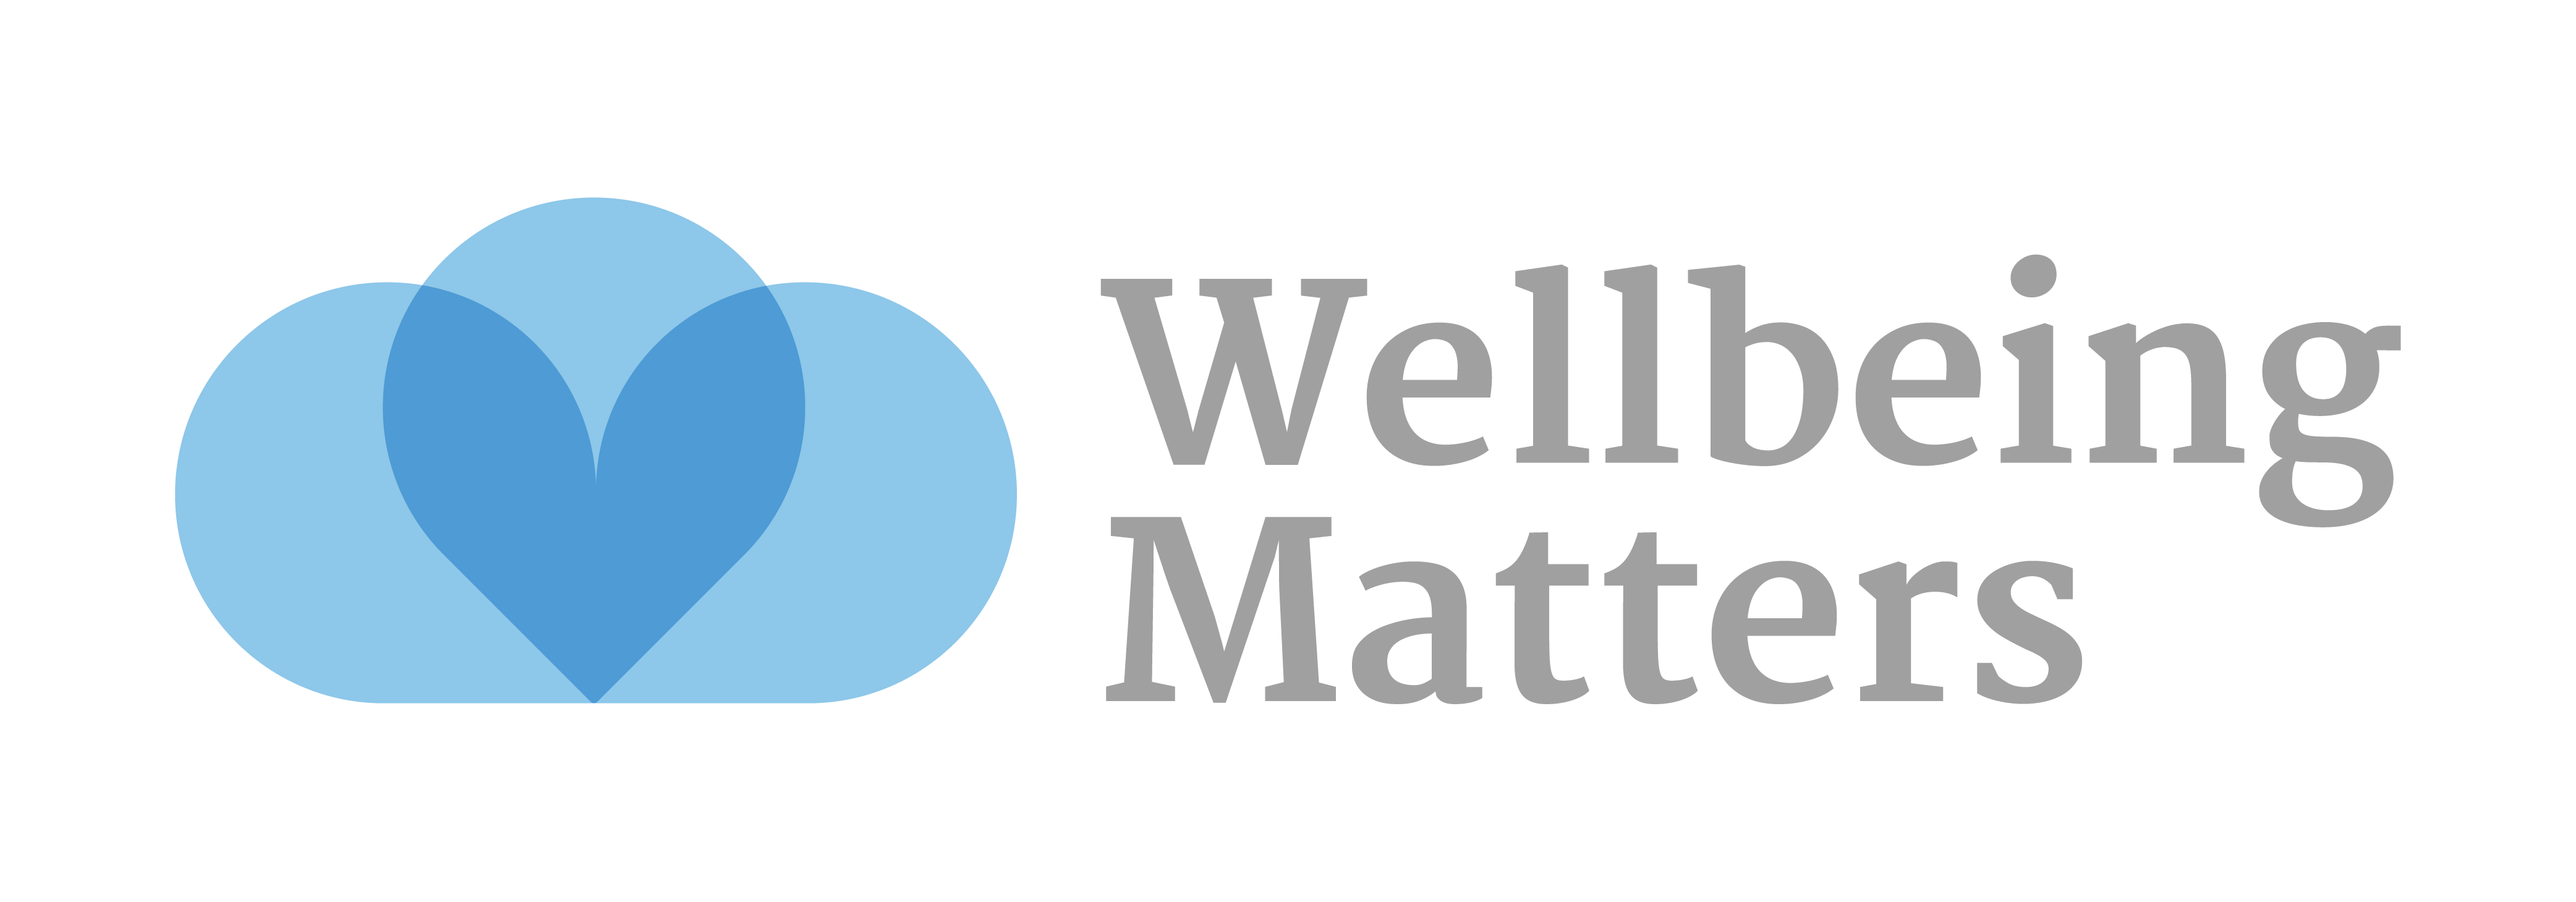 Wellbeing matters